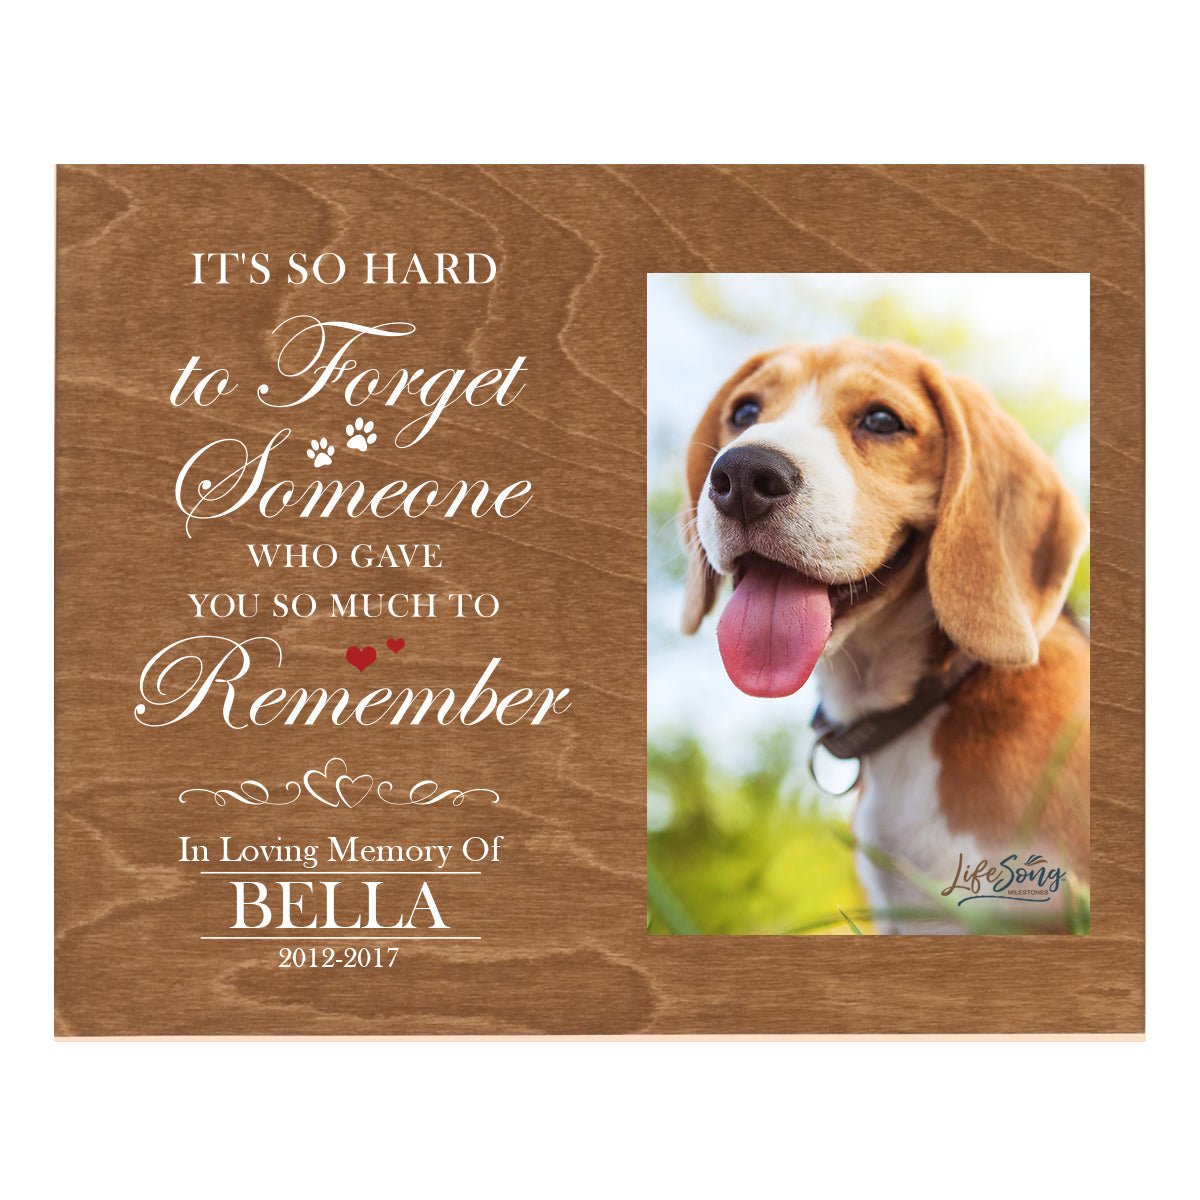 Pet Memorial Photo Wall Plaque Décor - It's So Hard To Forget - LifeSong Milestones